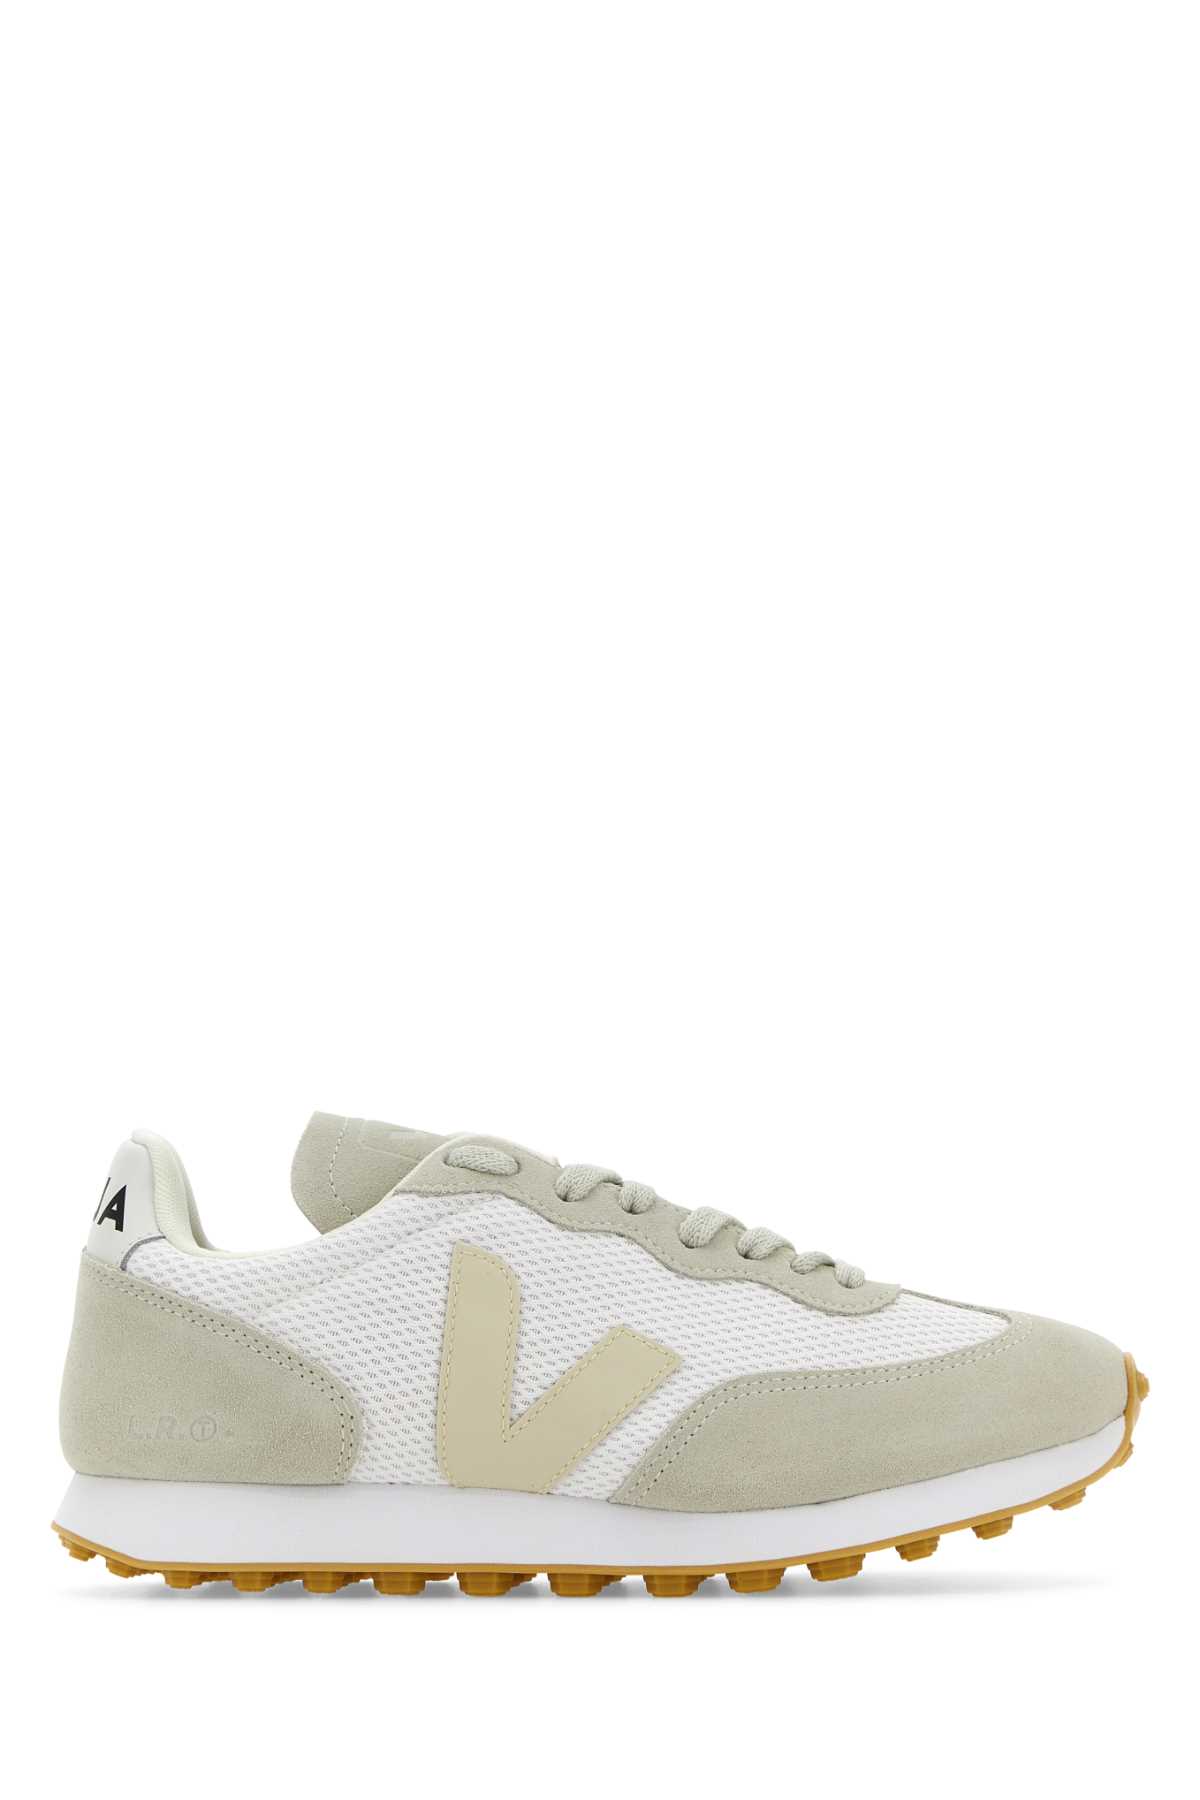 Two-tones Polyester And Suede Rio Branco Sneakers